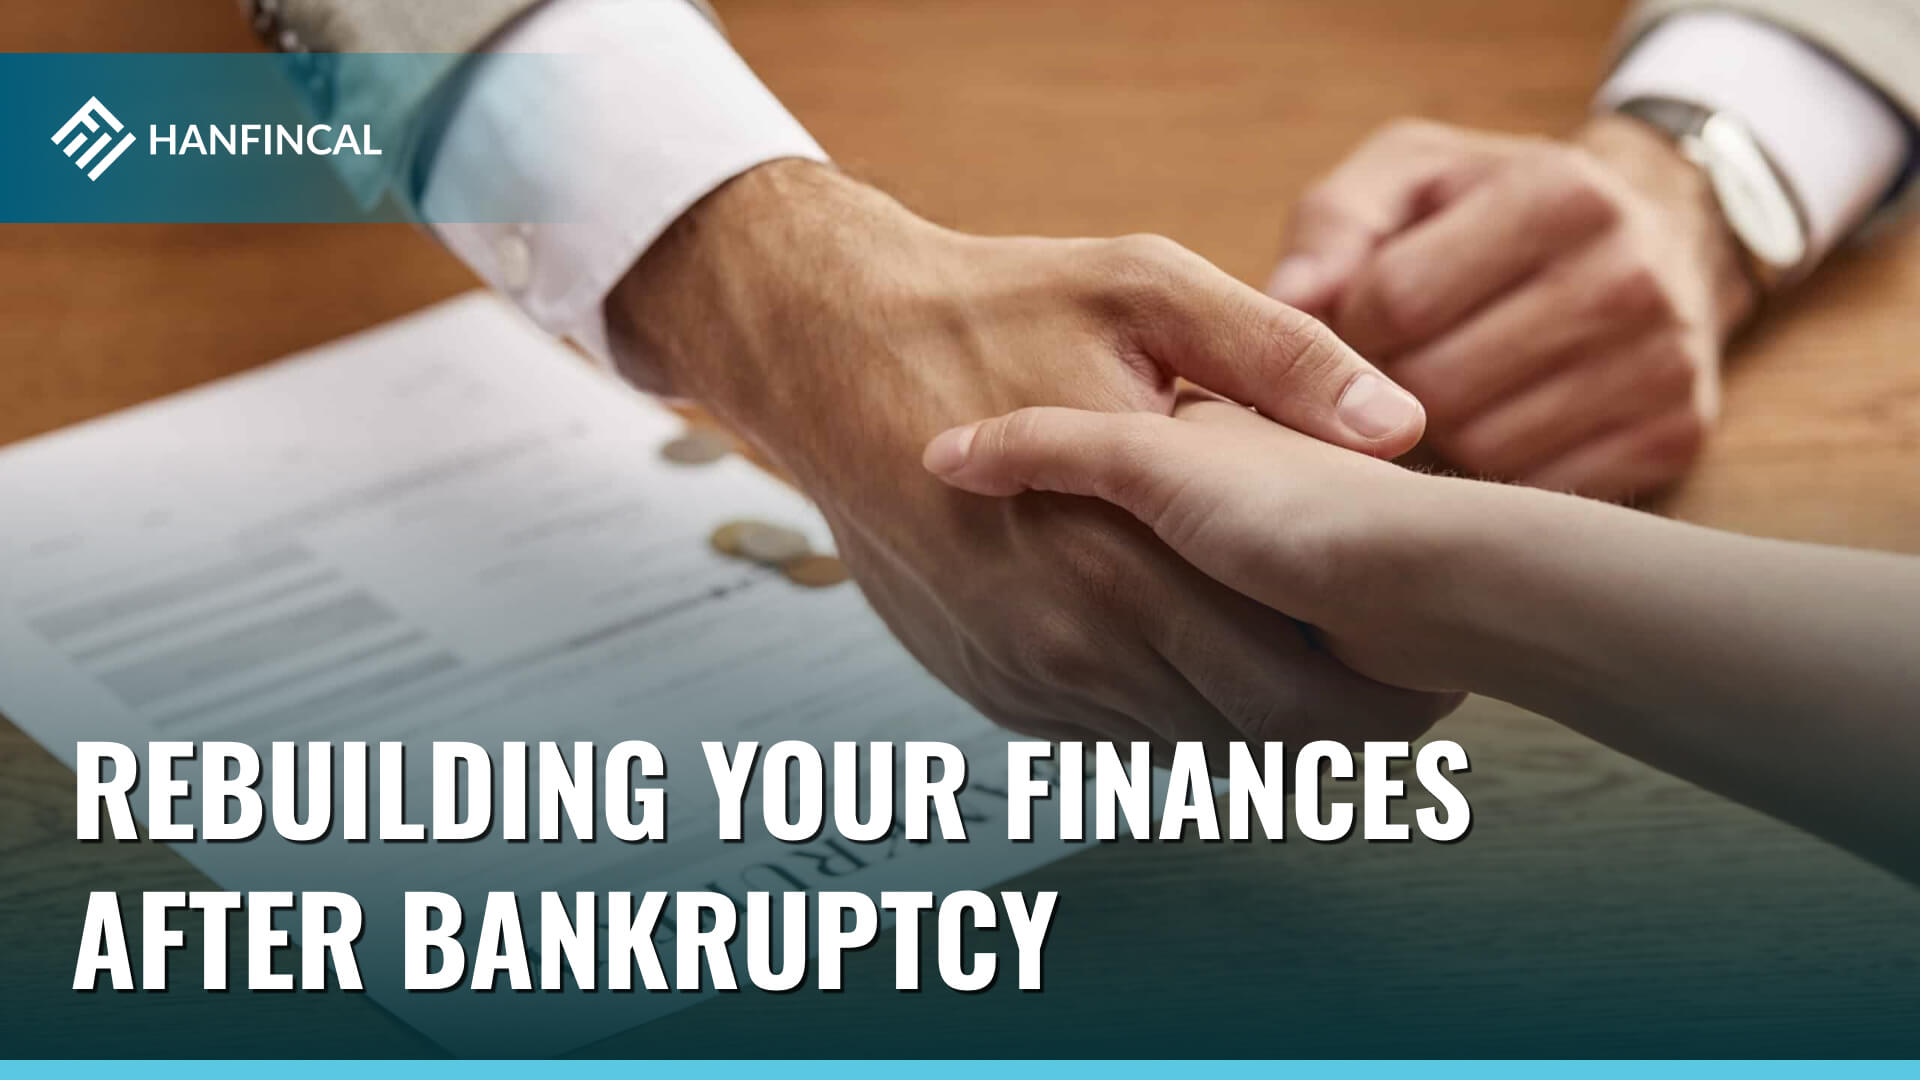 3 Ways to rebuild your finances after bankruptcy